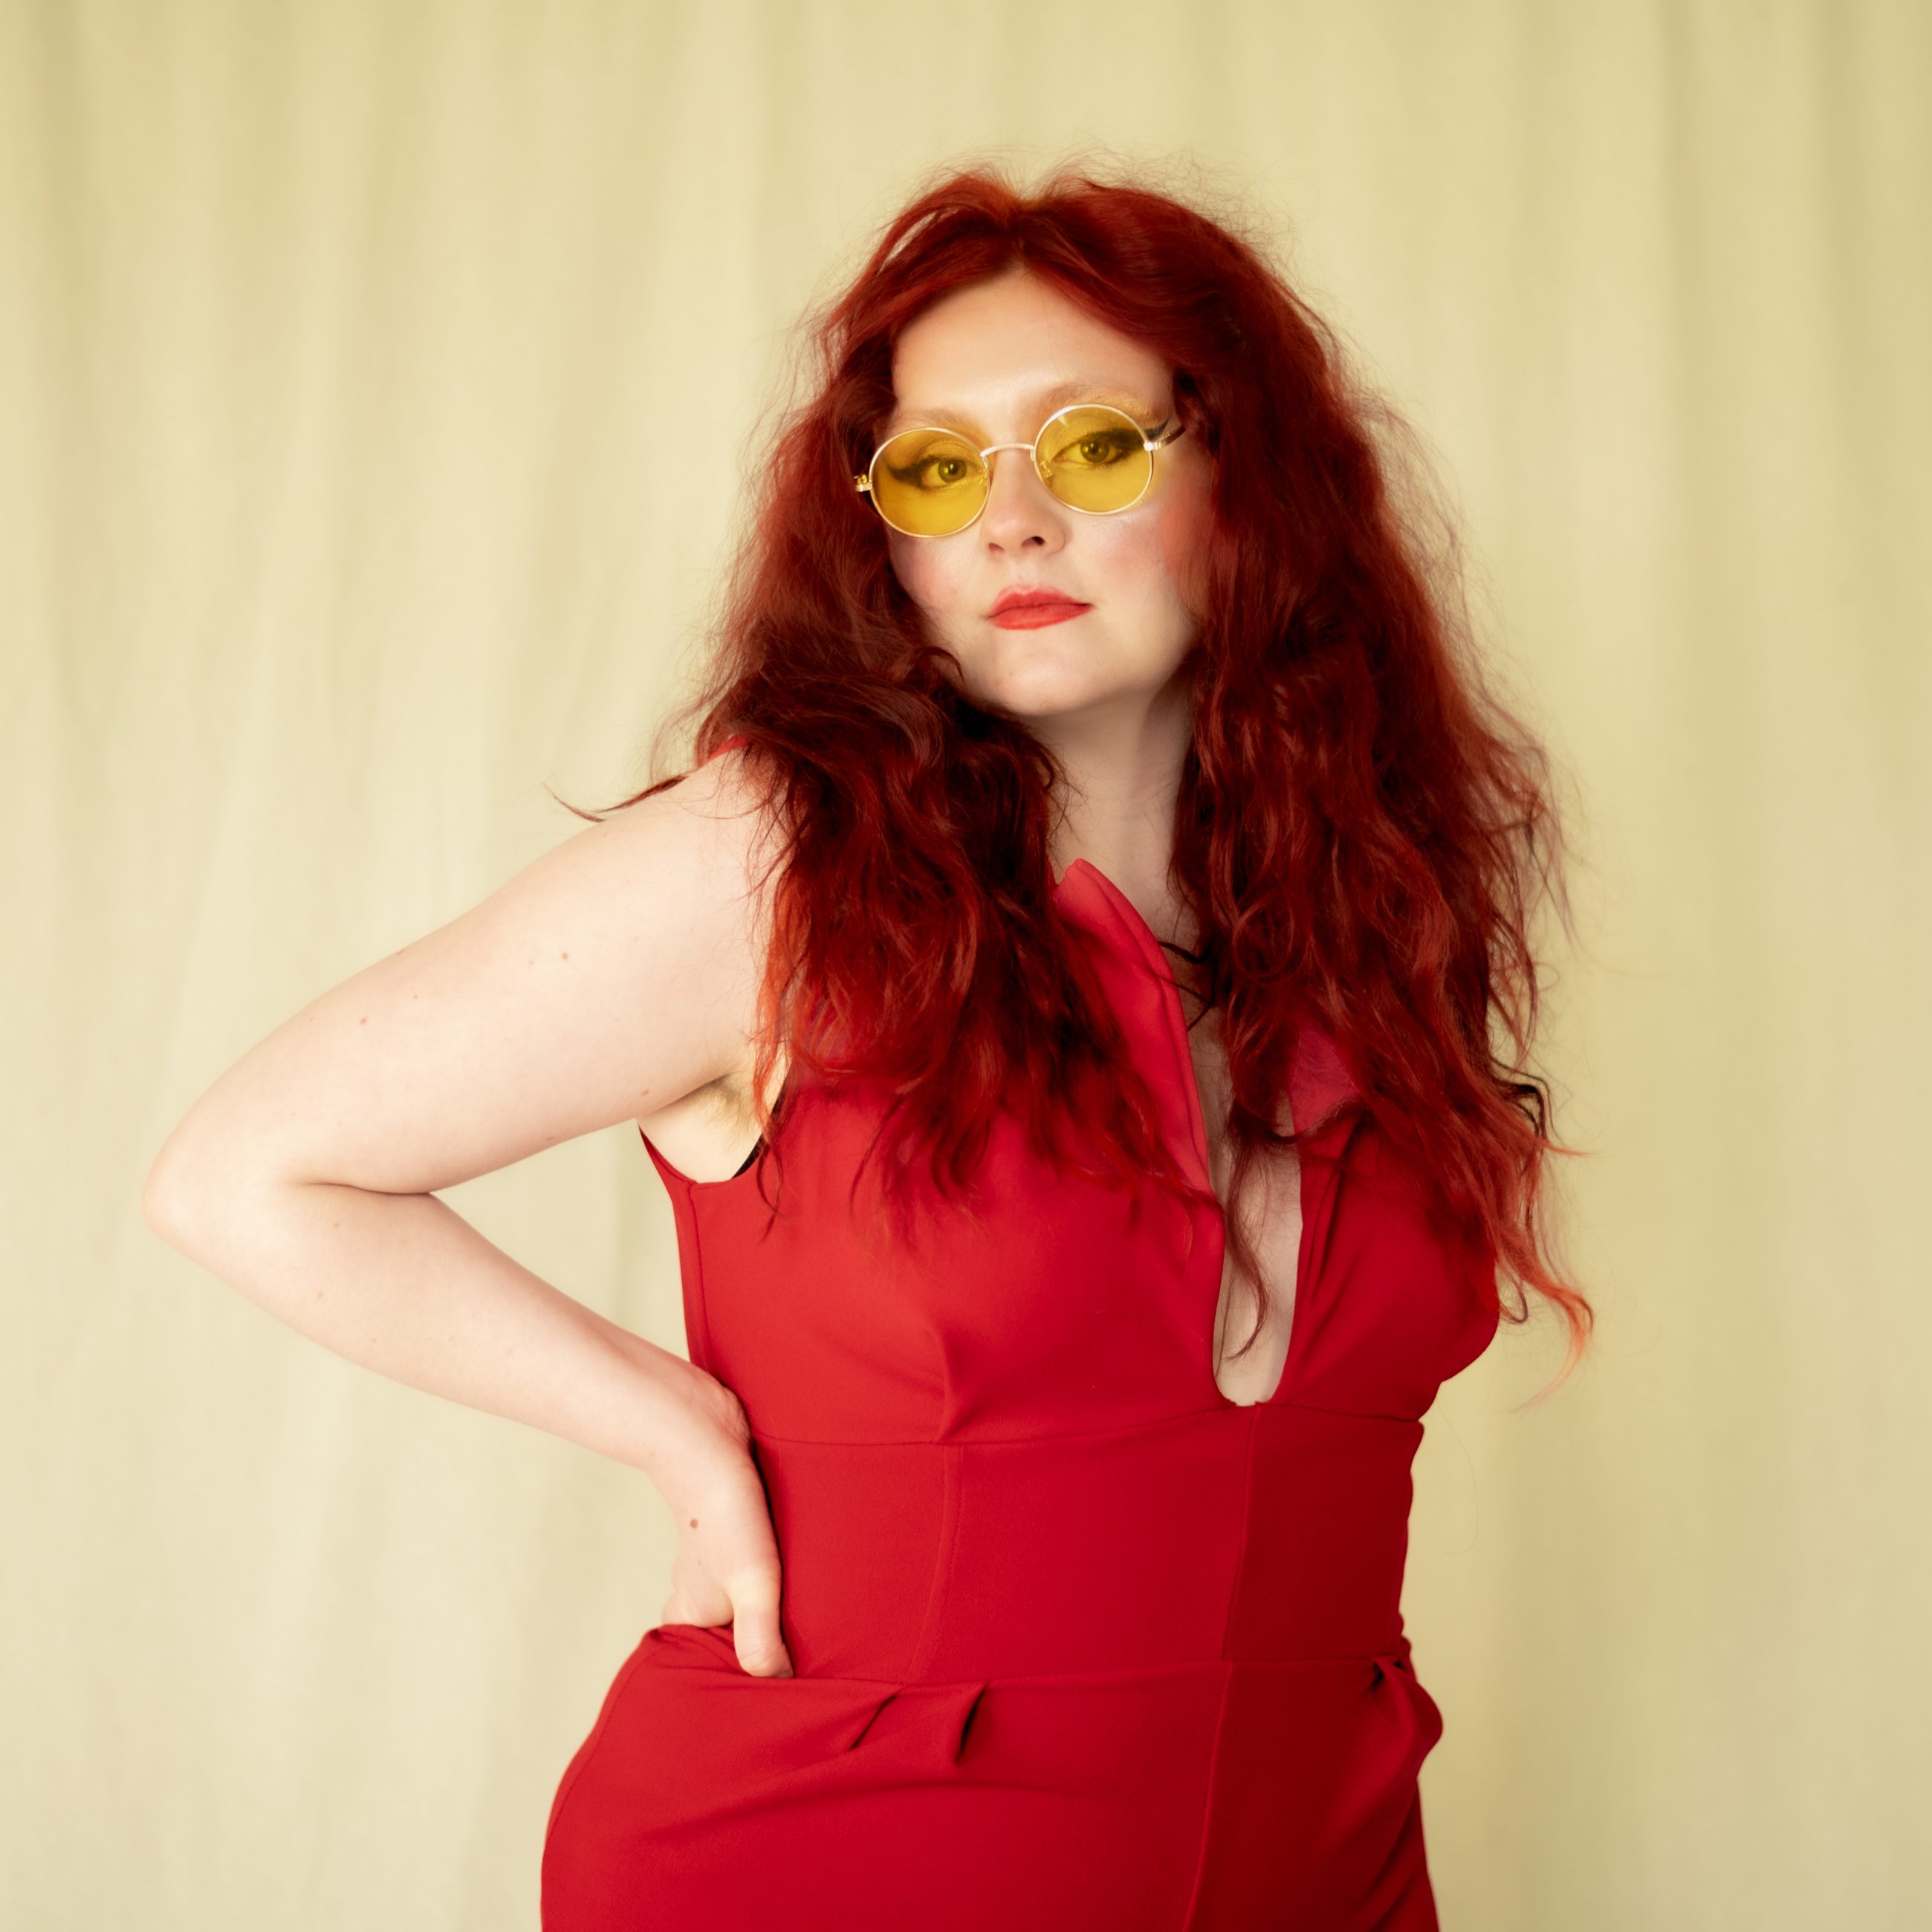 photo of artist megan black. wearing a red top and 70s-style sunglasses